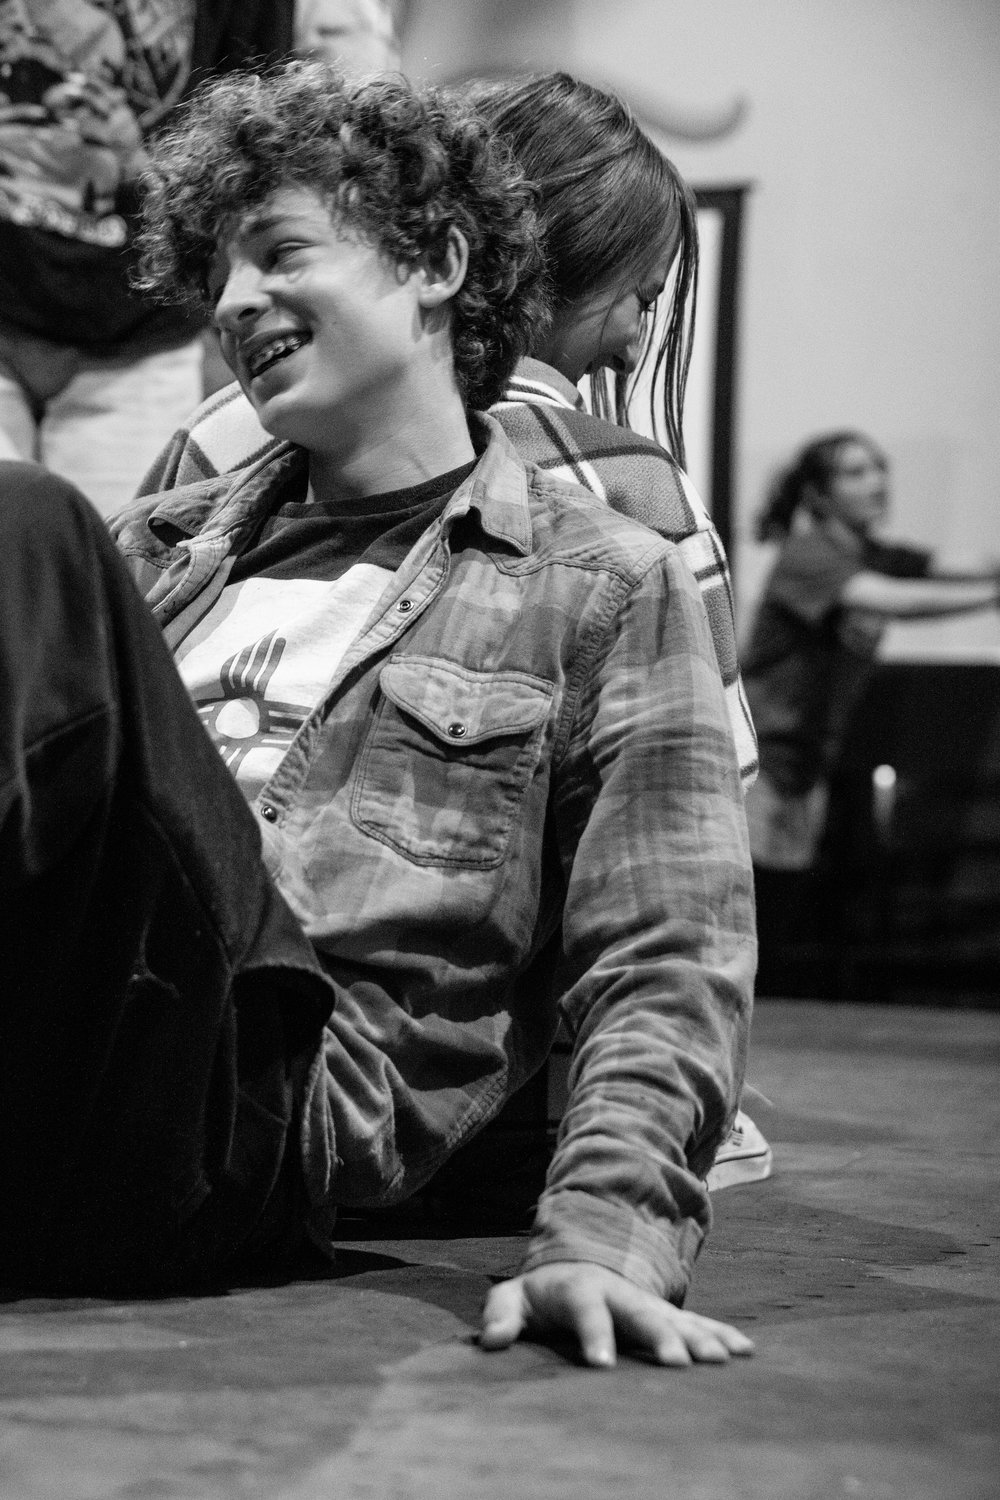 Dominic Rasmussen, left, and Dara Werber, right, in rehearsal for Romeo and Juliet. These two young actors play the titular roles.